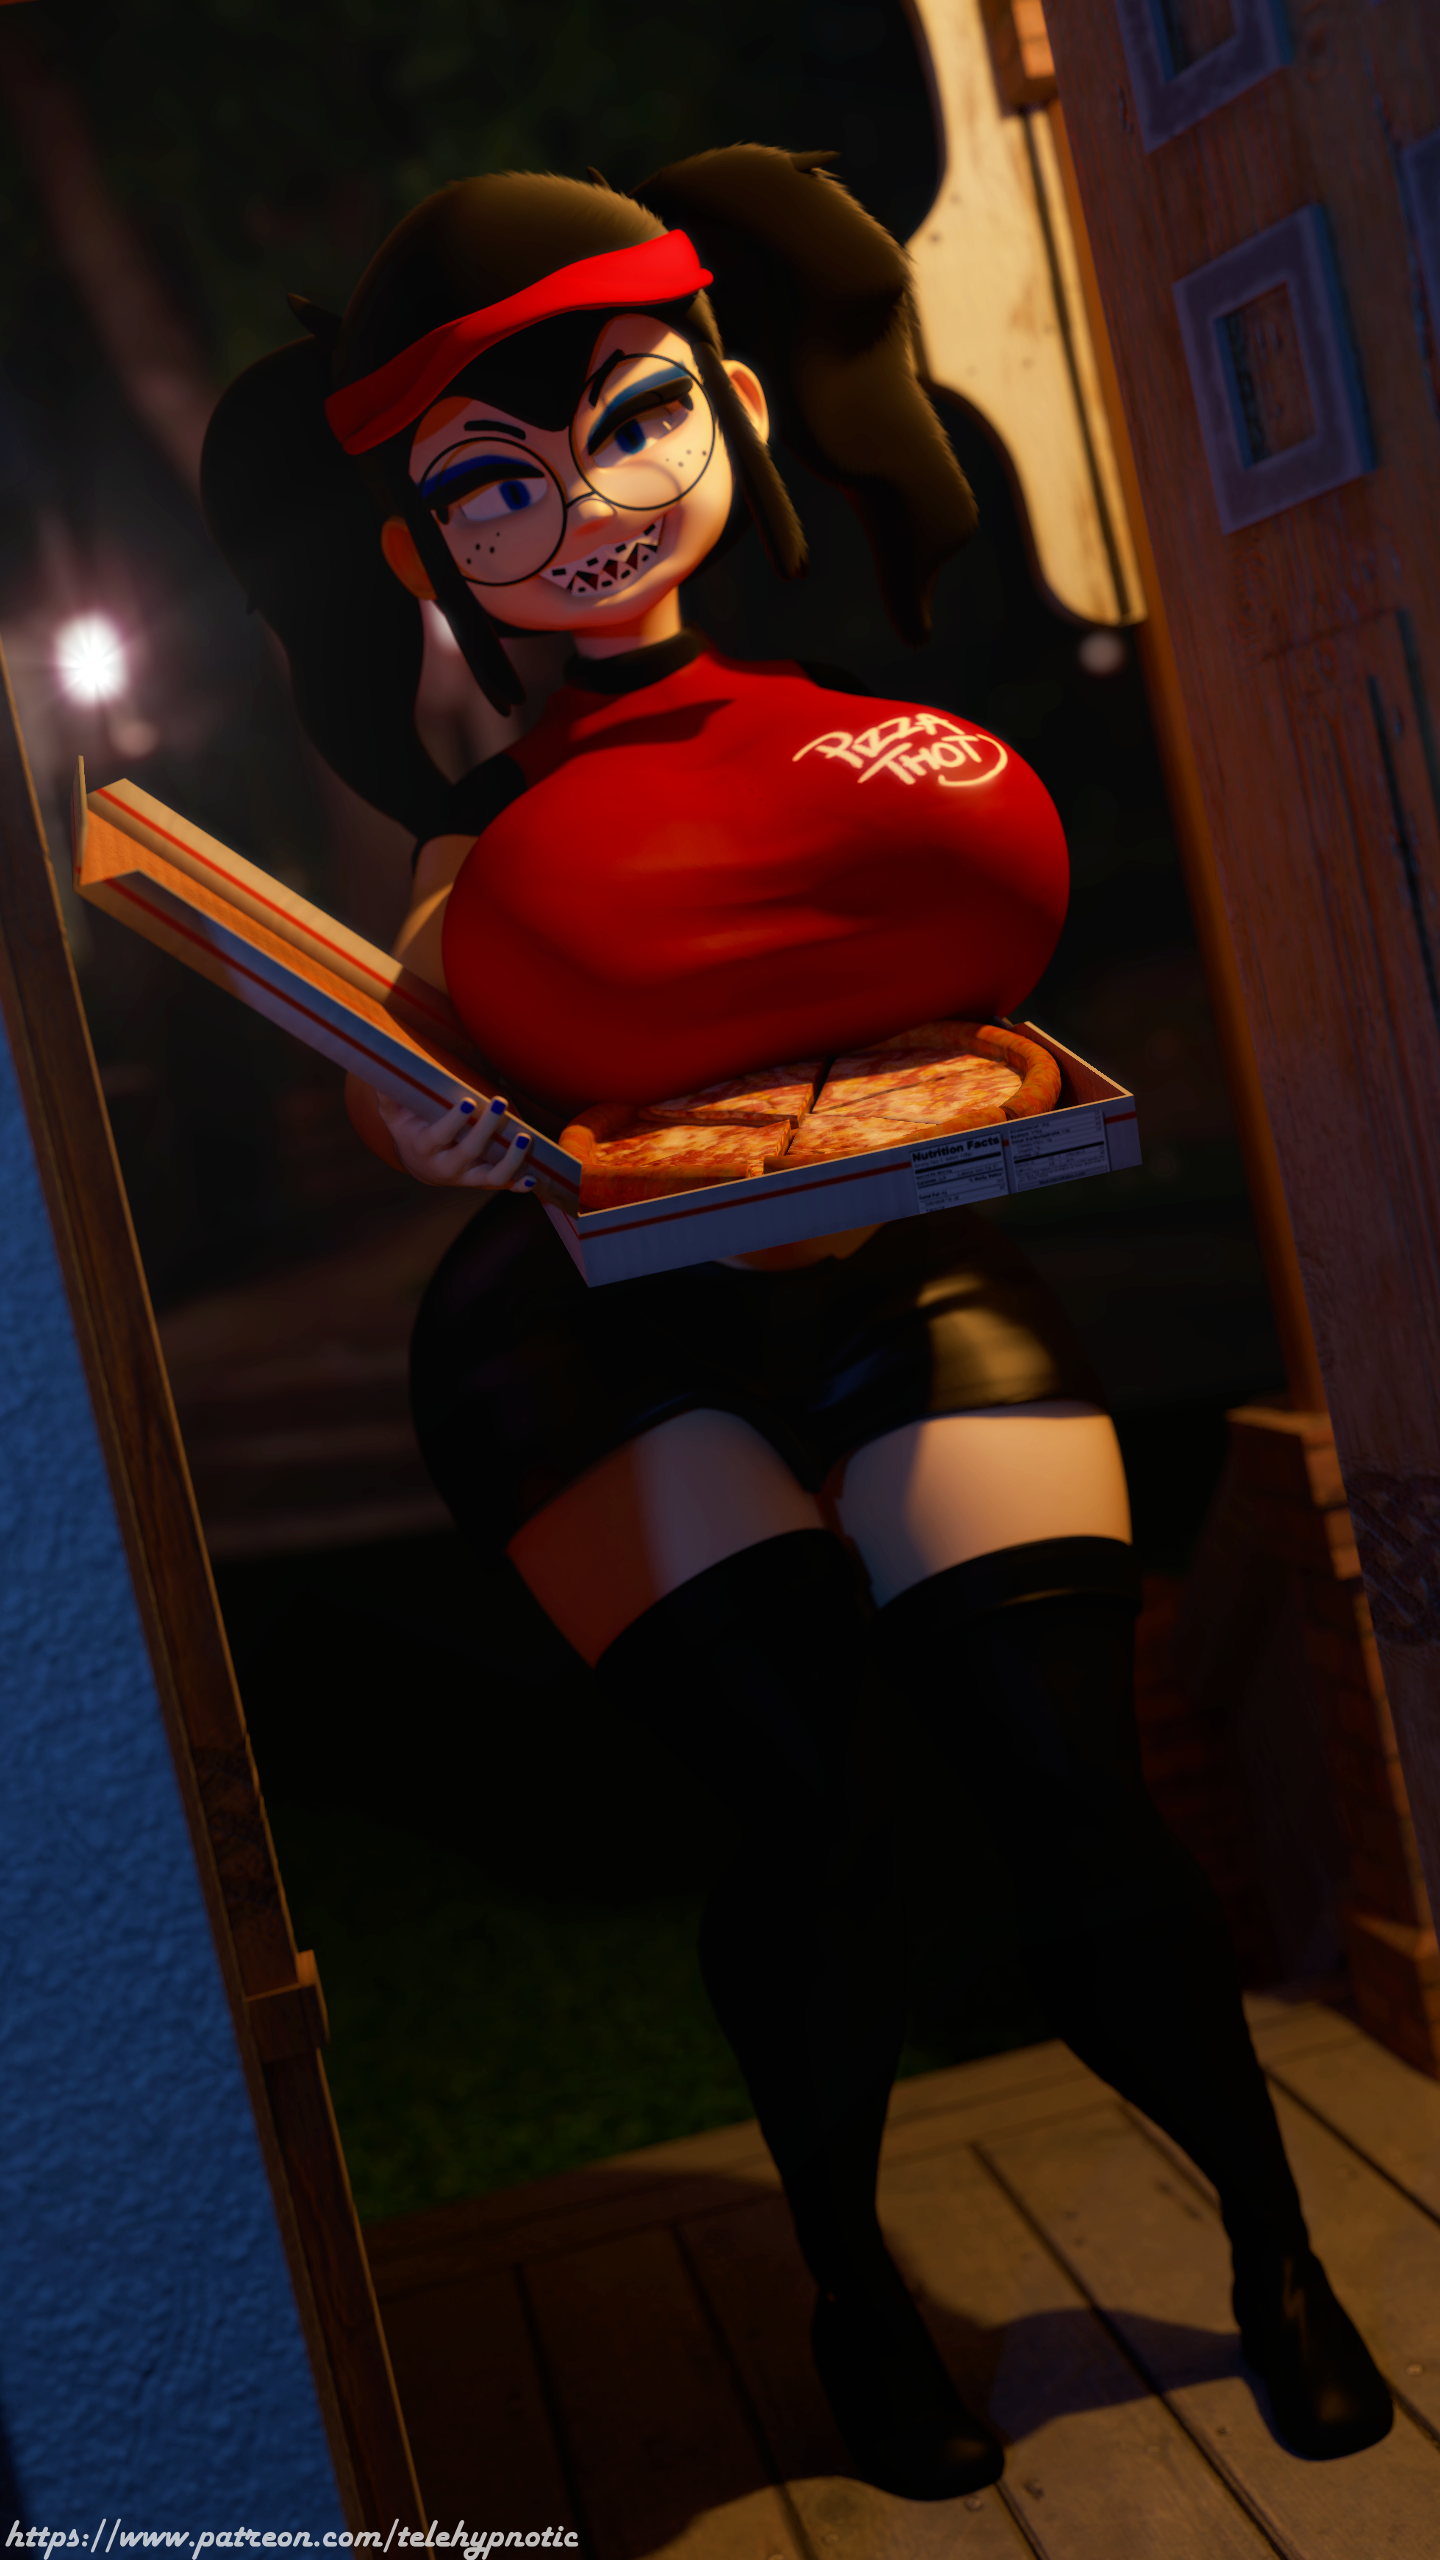 Pizza Delivery By Telehypnotic On Deviantart